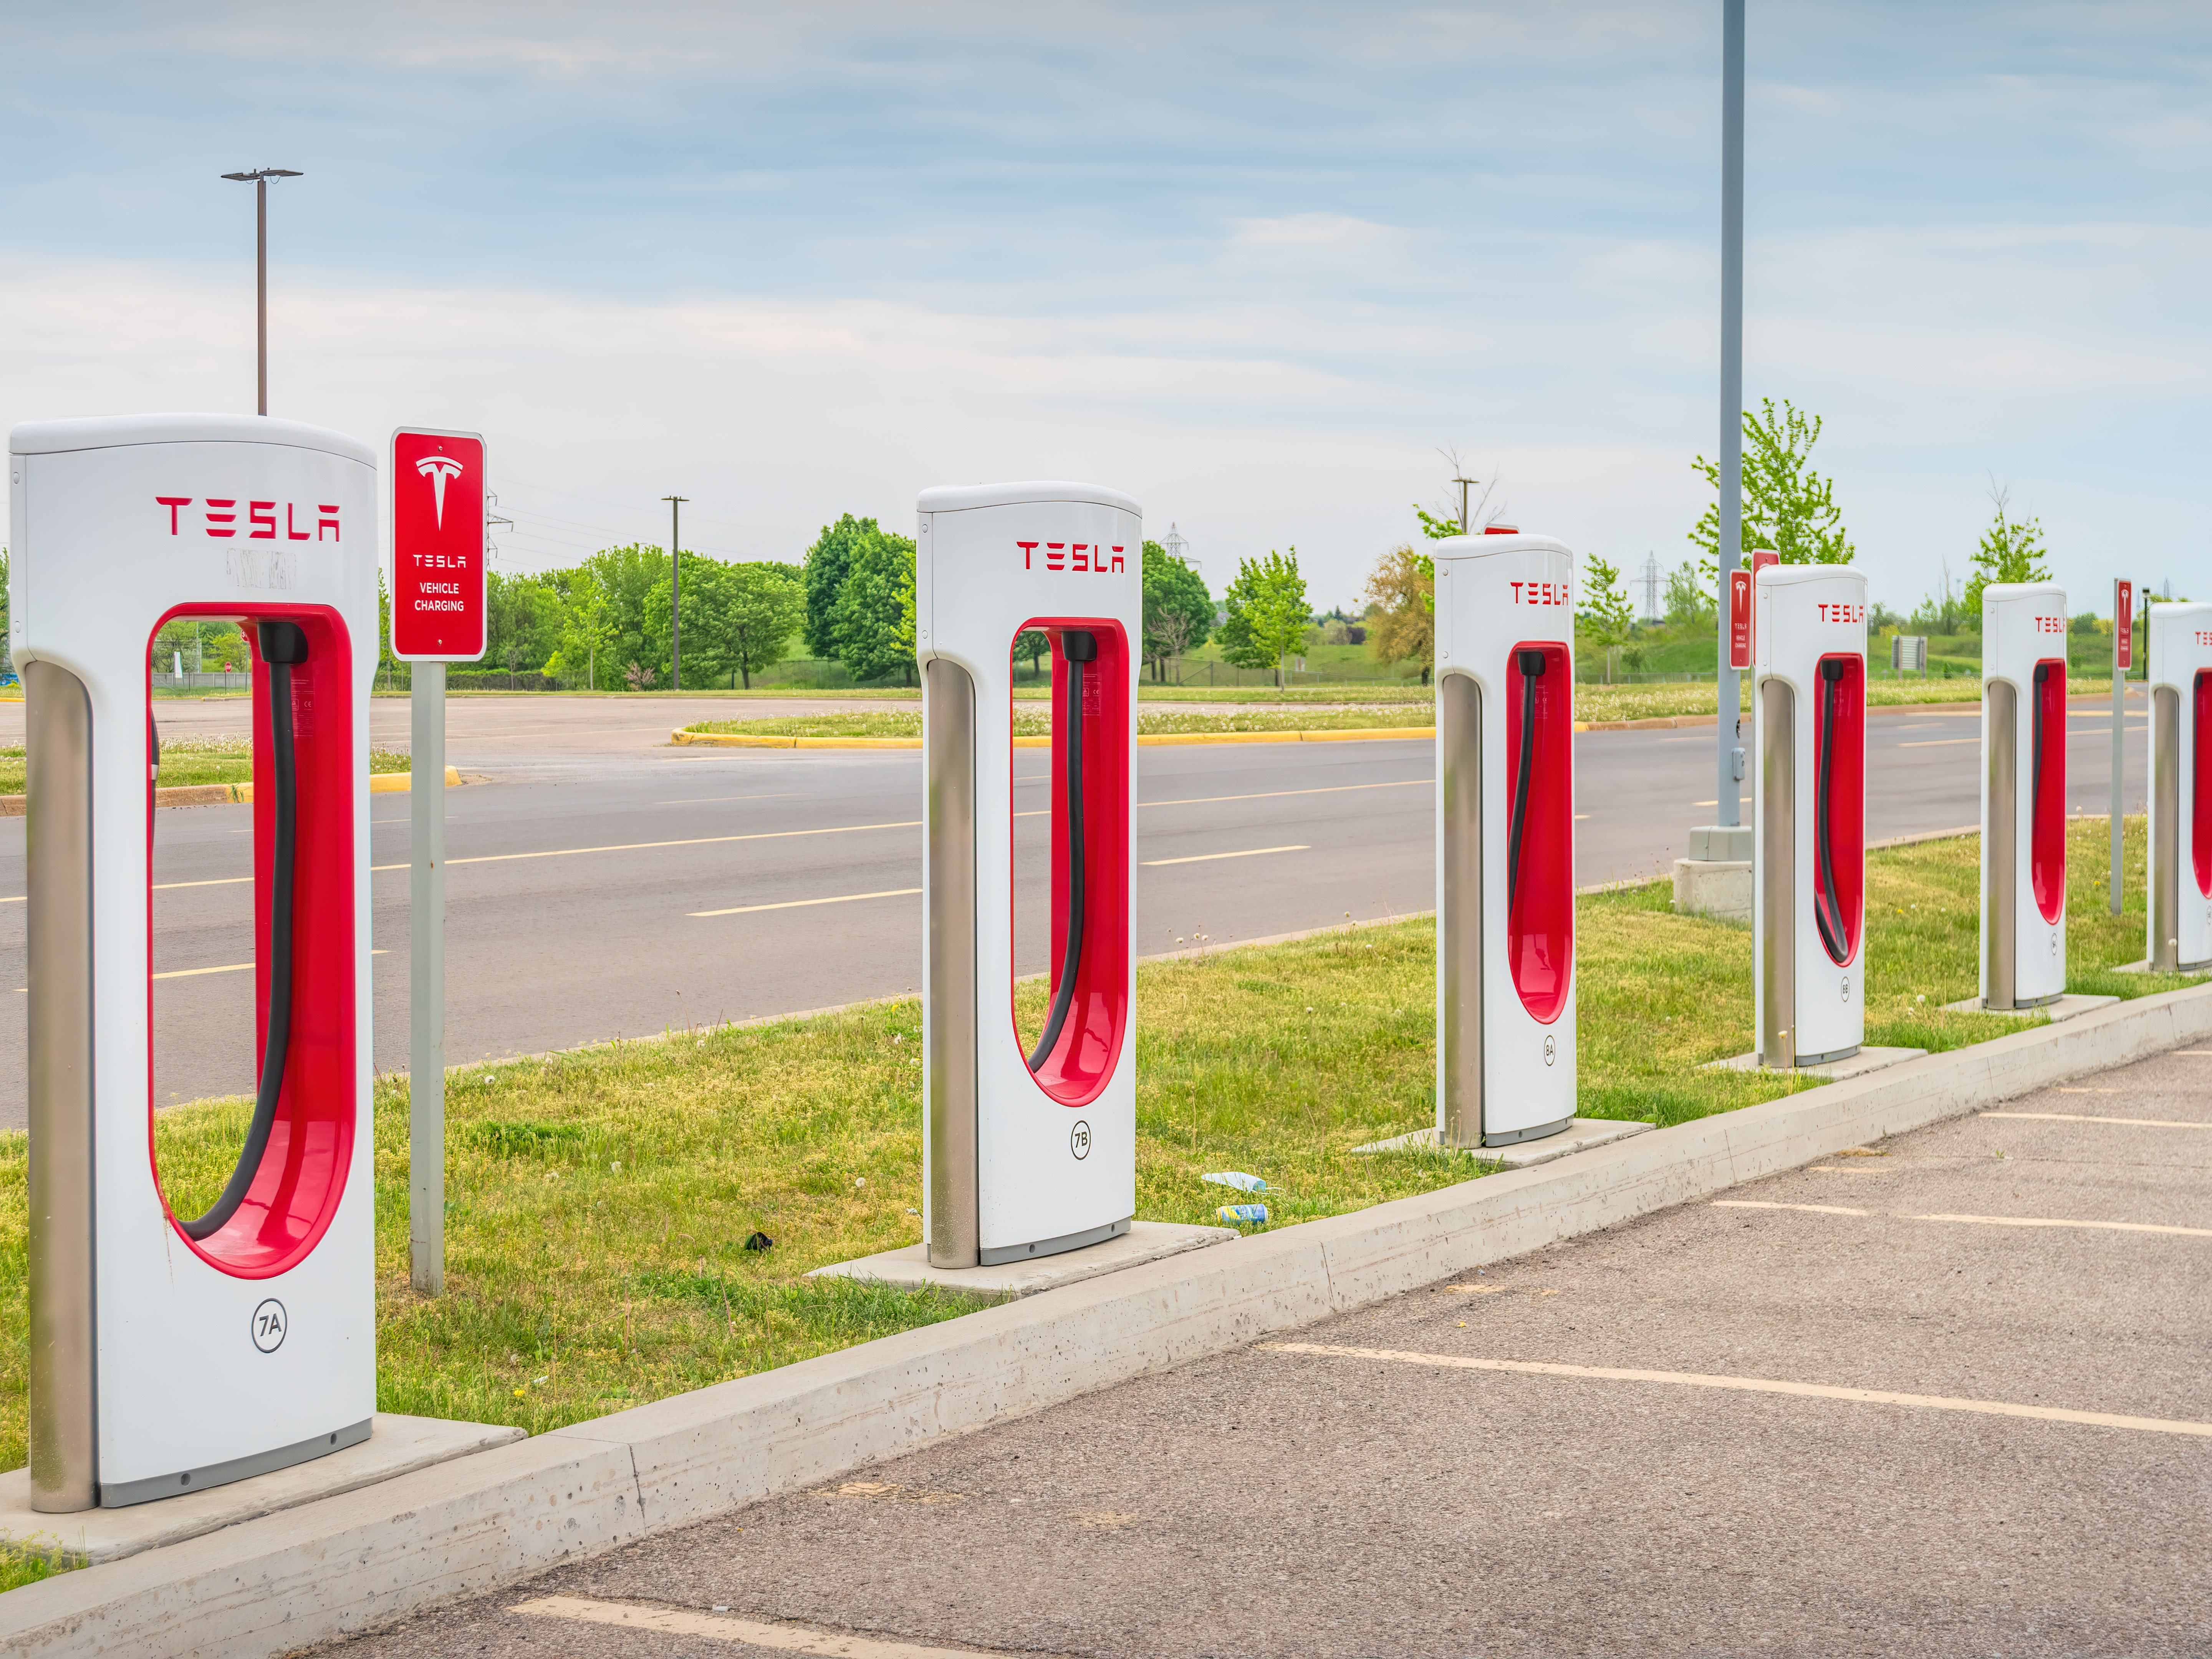 Tesla Opens Up Supercharger Network in UK - An Affordable Charge for Electric Vehicle Owners